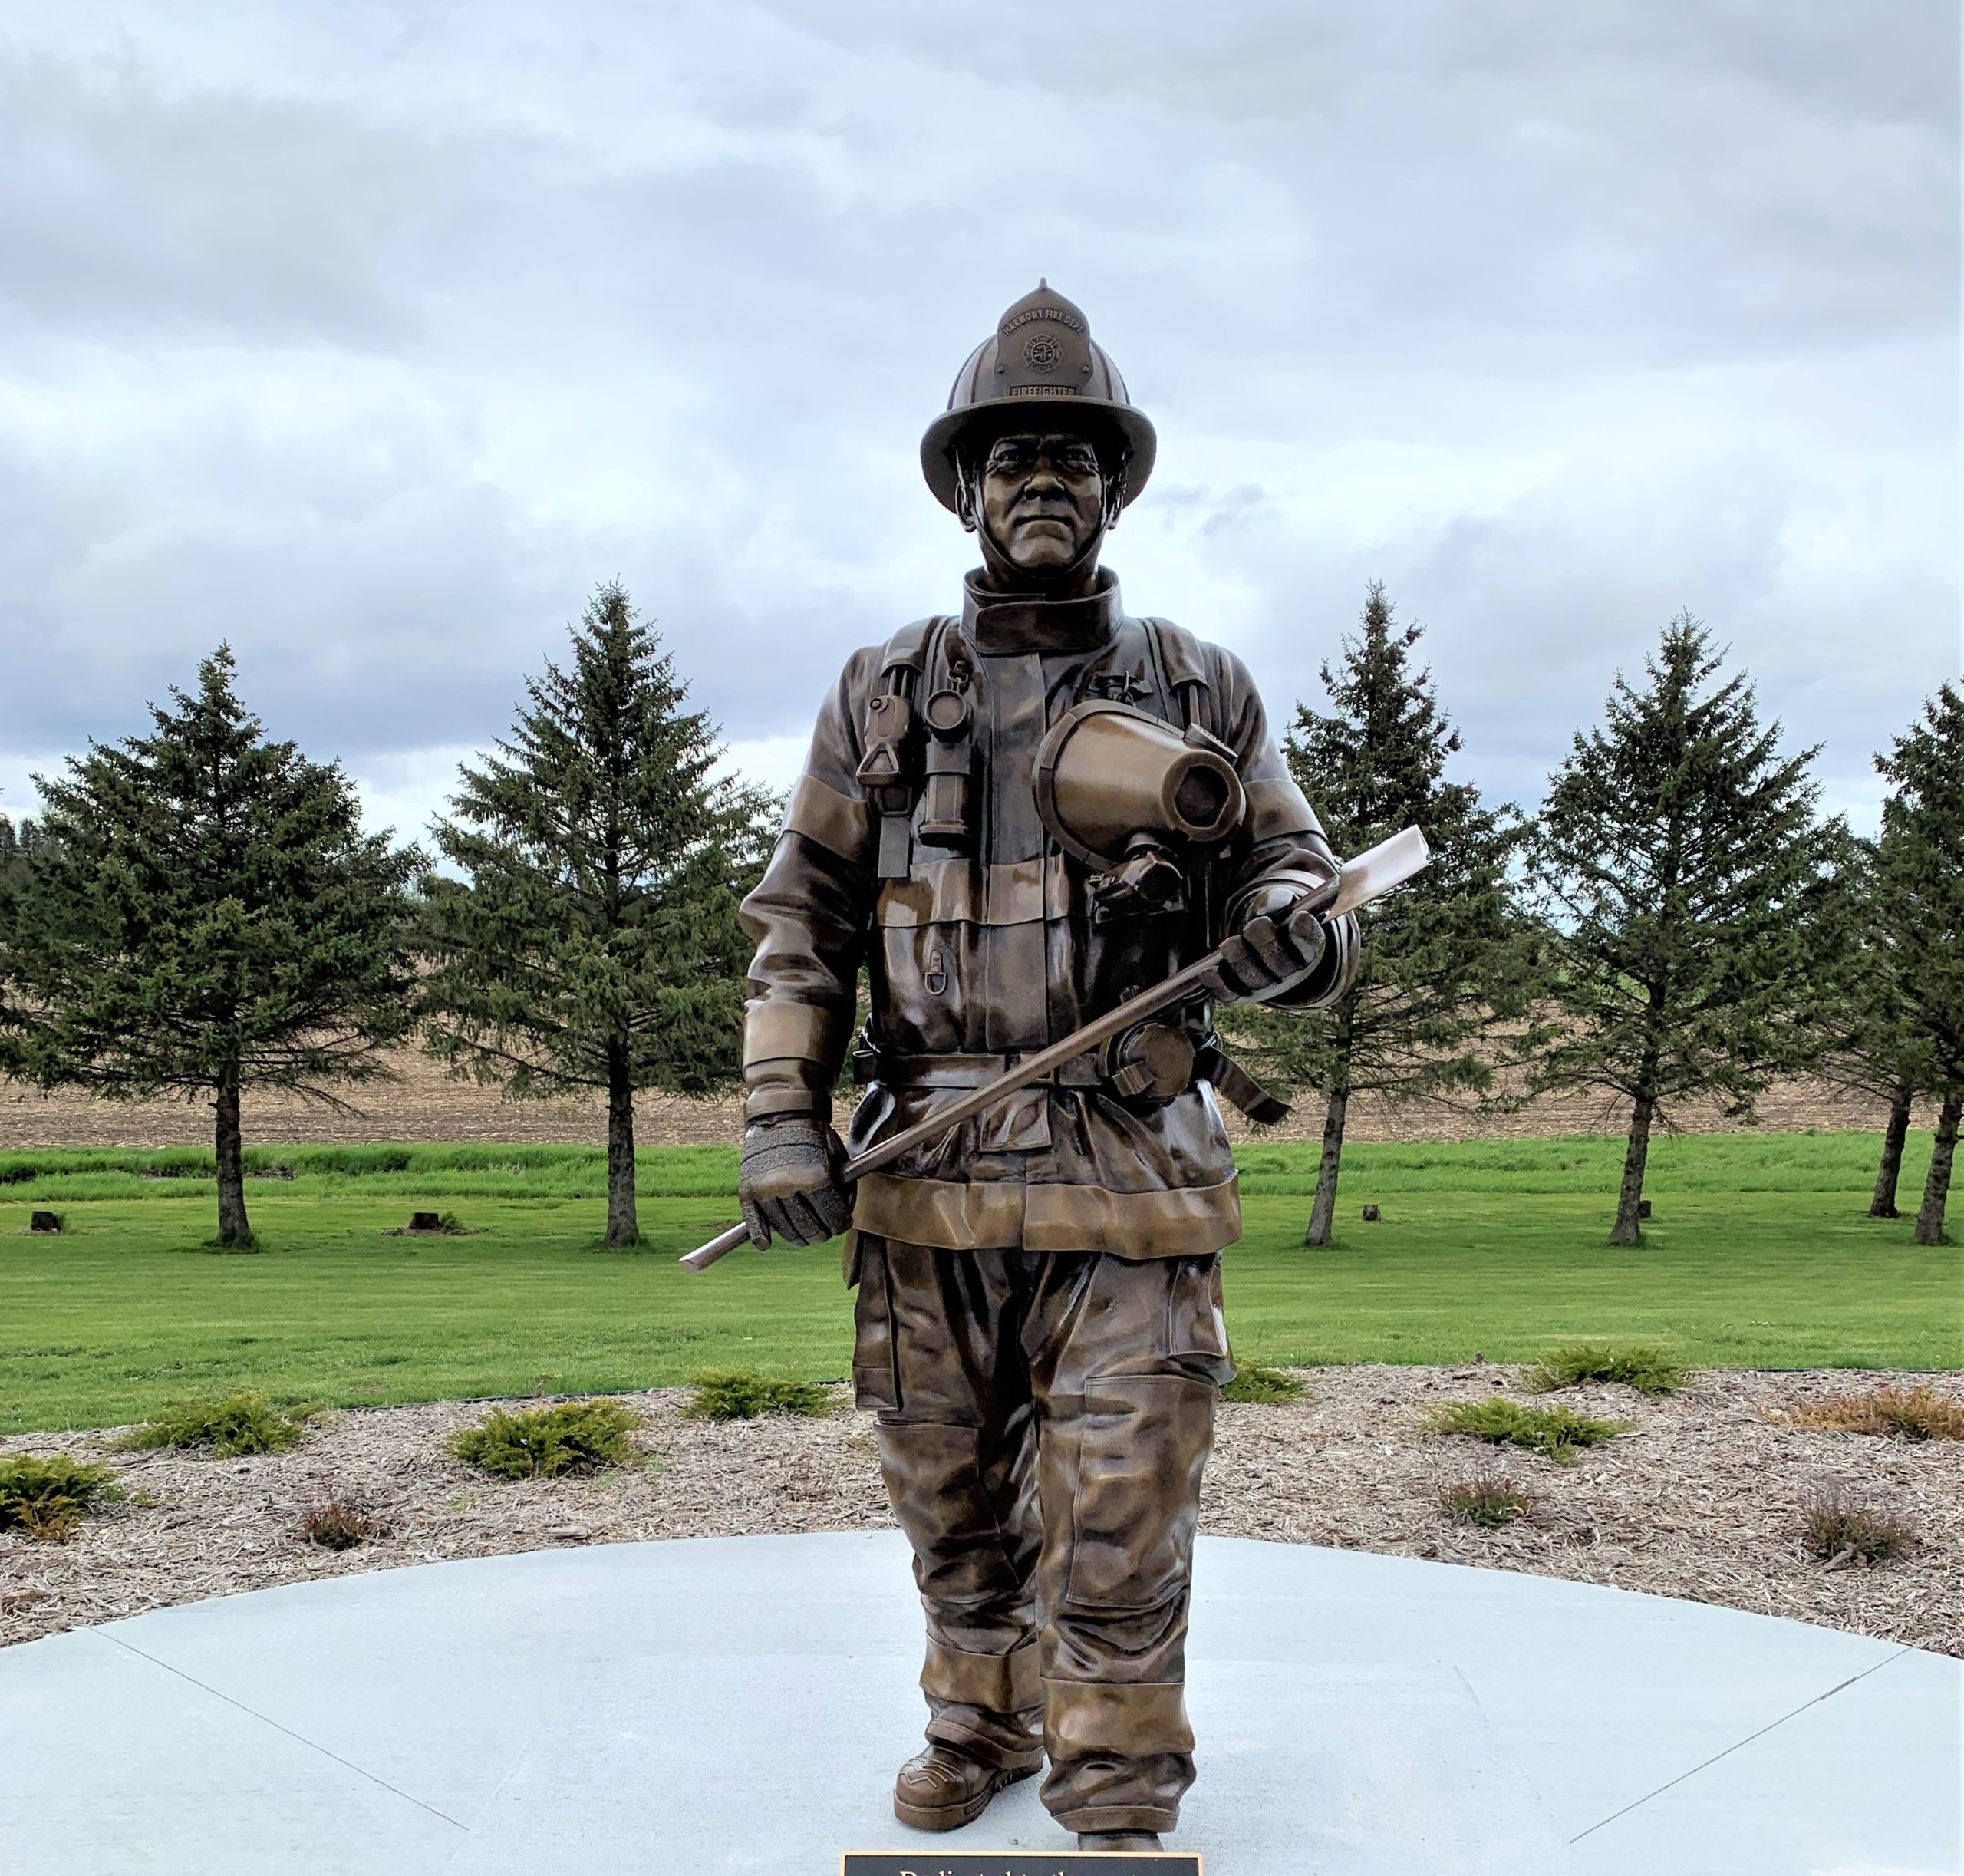 Bronze firefighter in uniform with gear holding axe statue